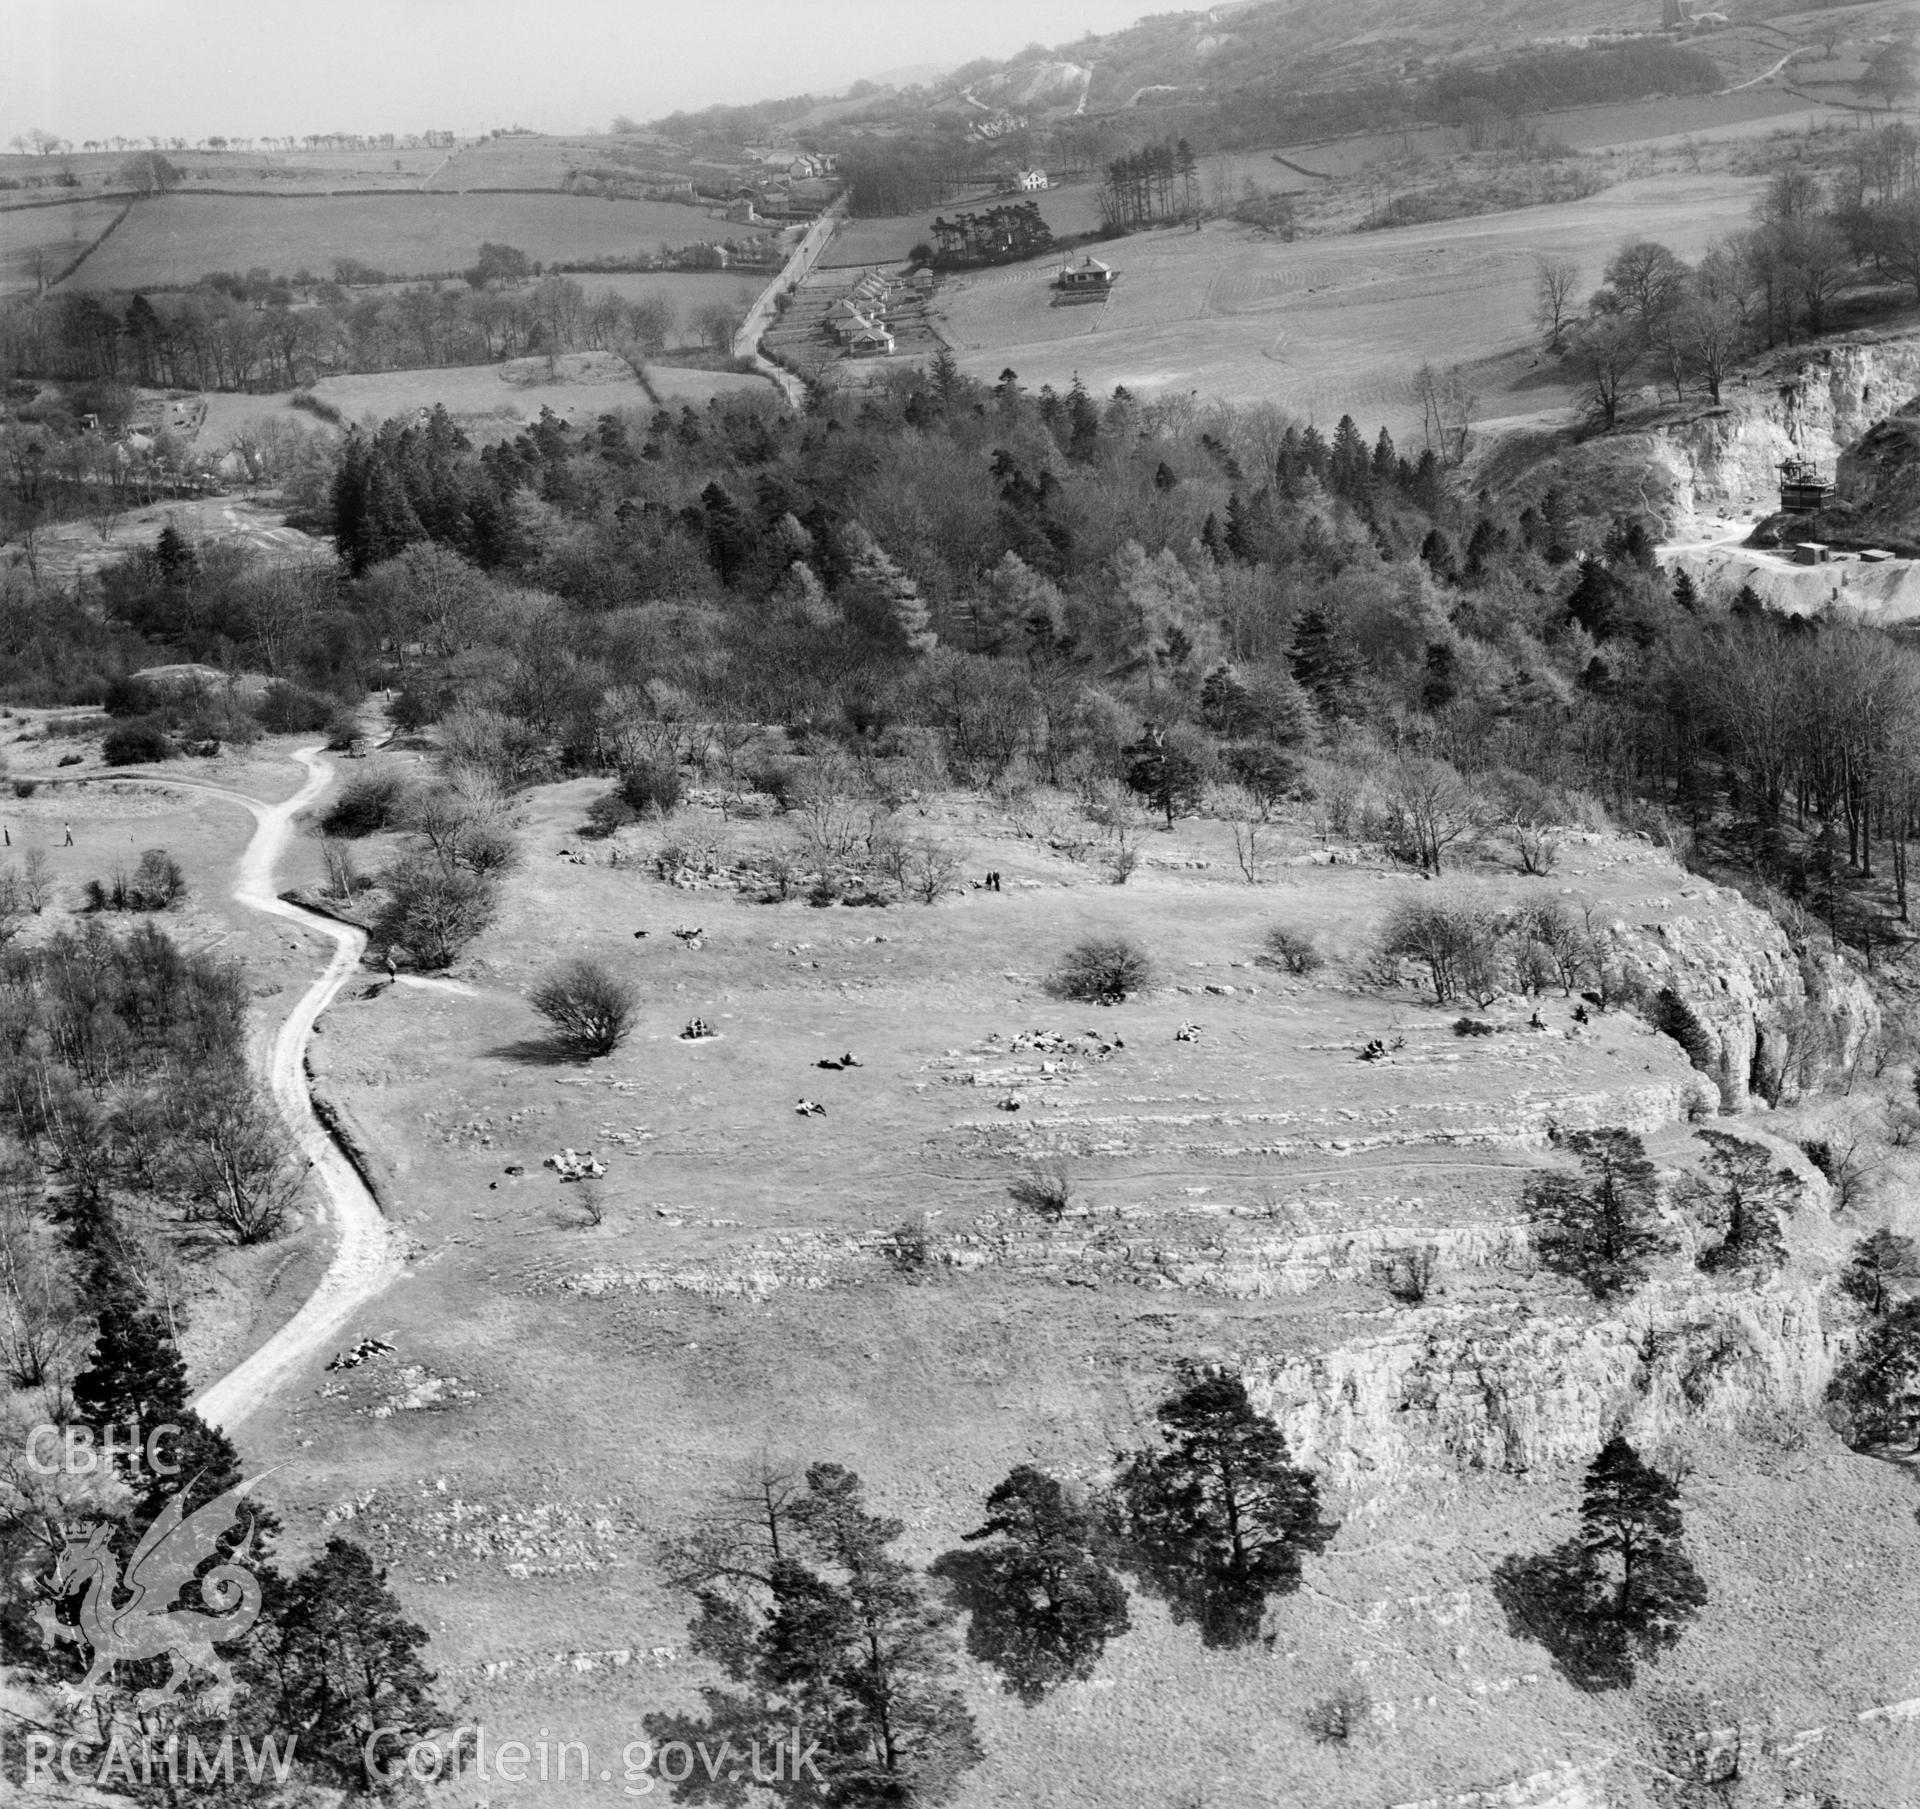 View showing sandstone outcrops at Loggerheads Country Park